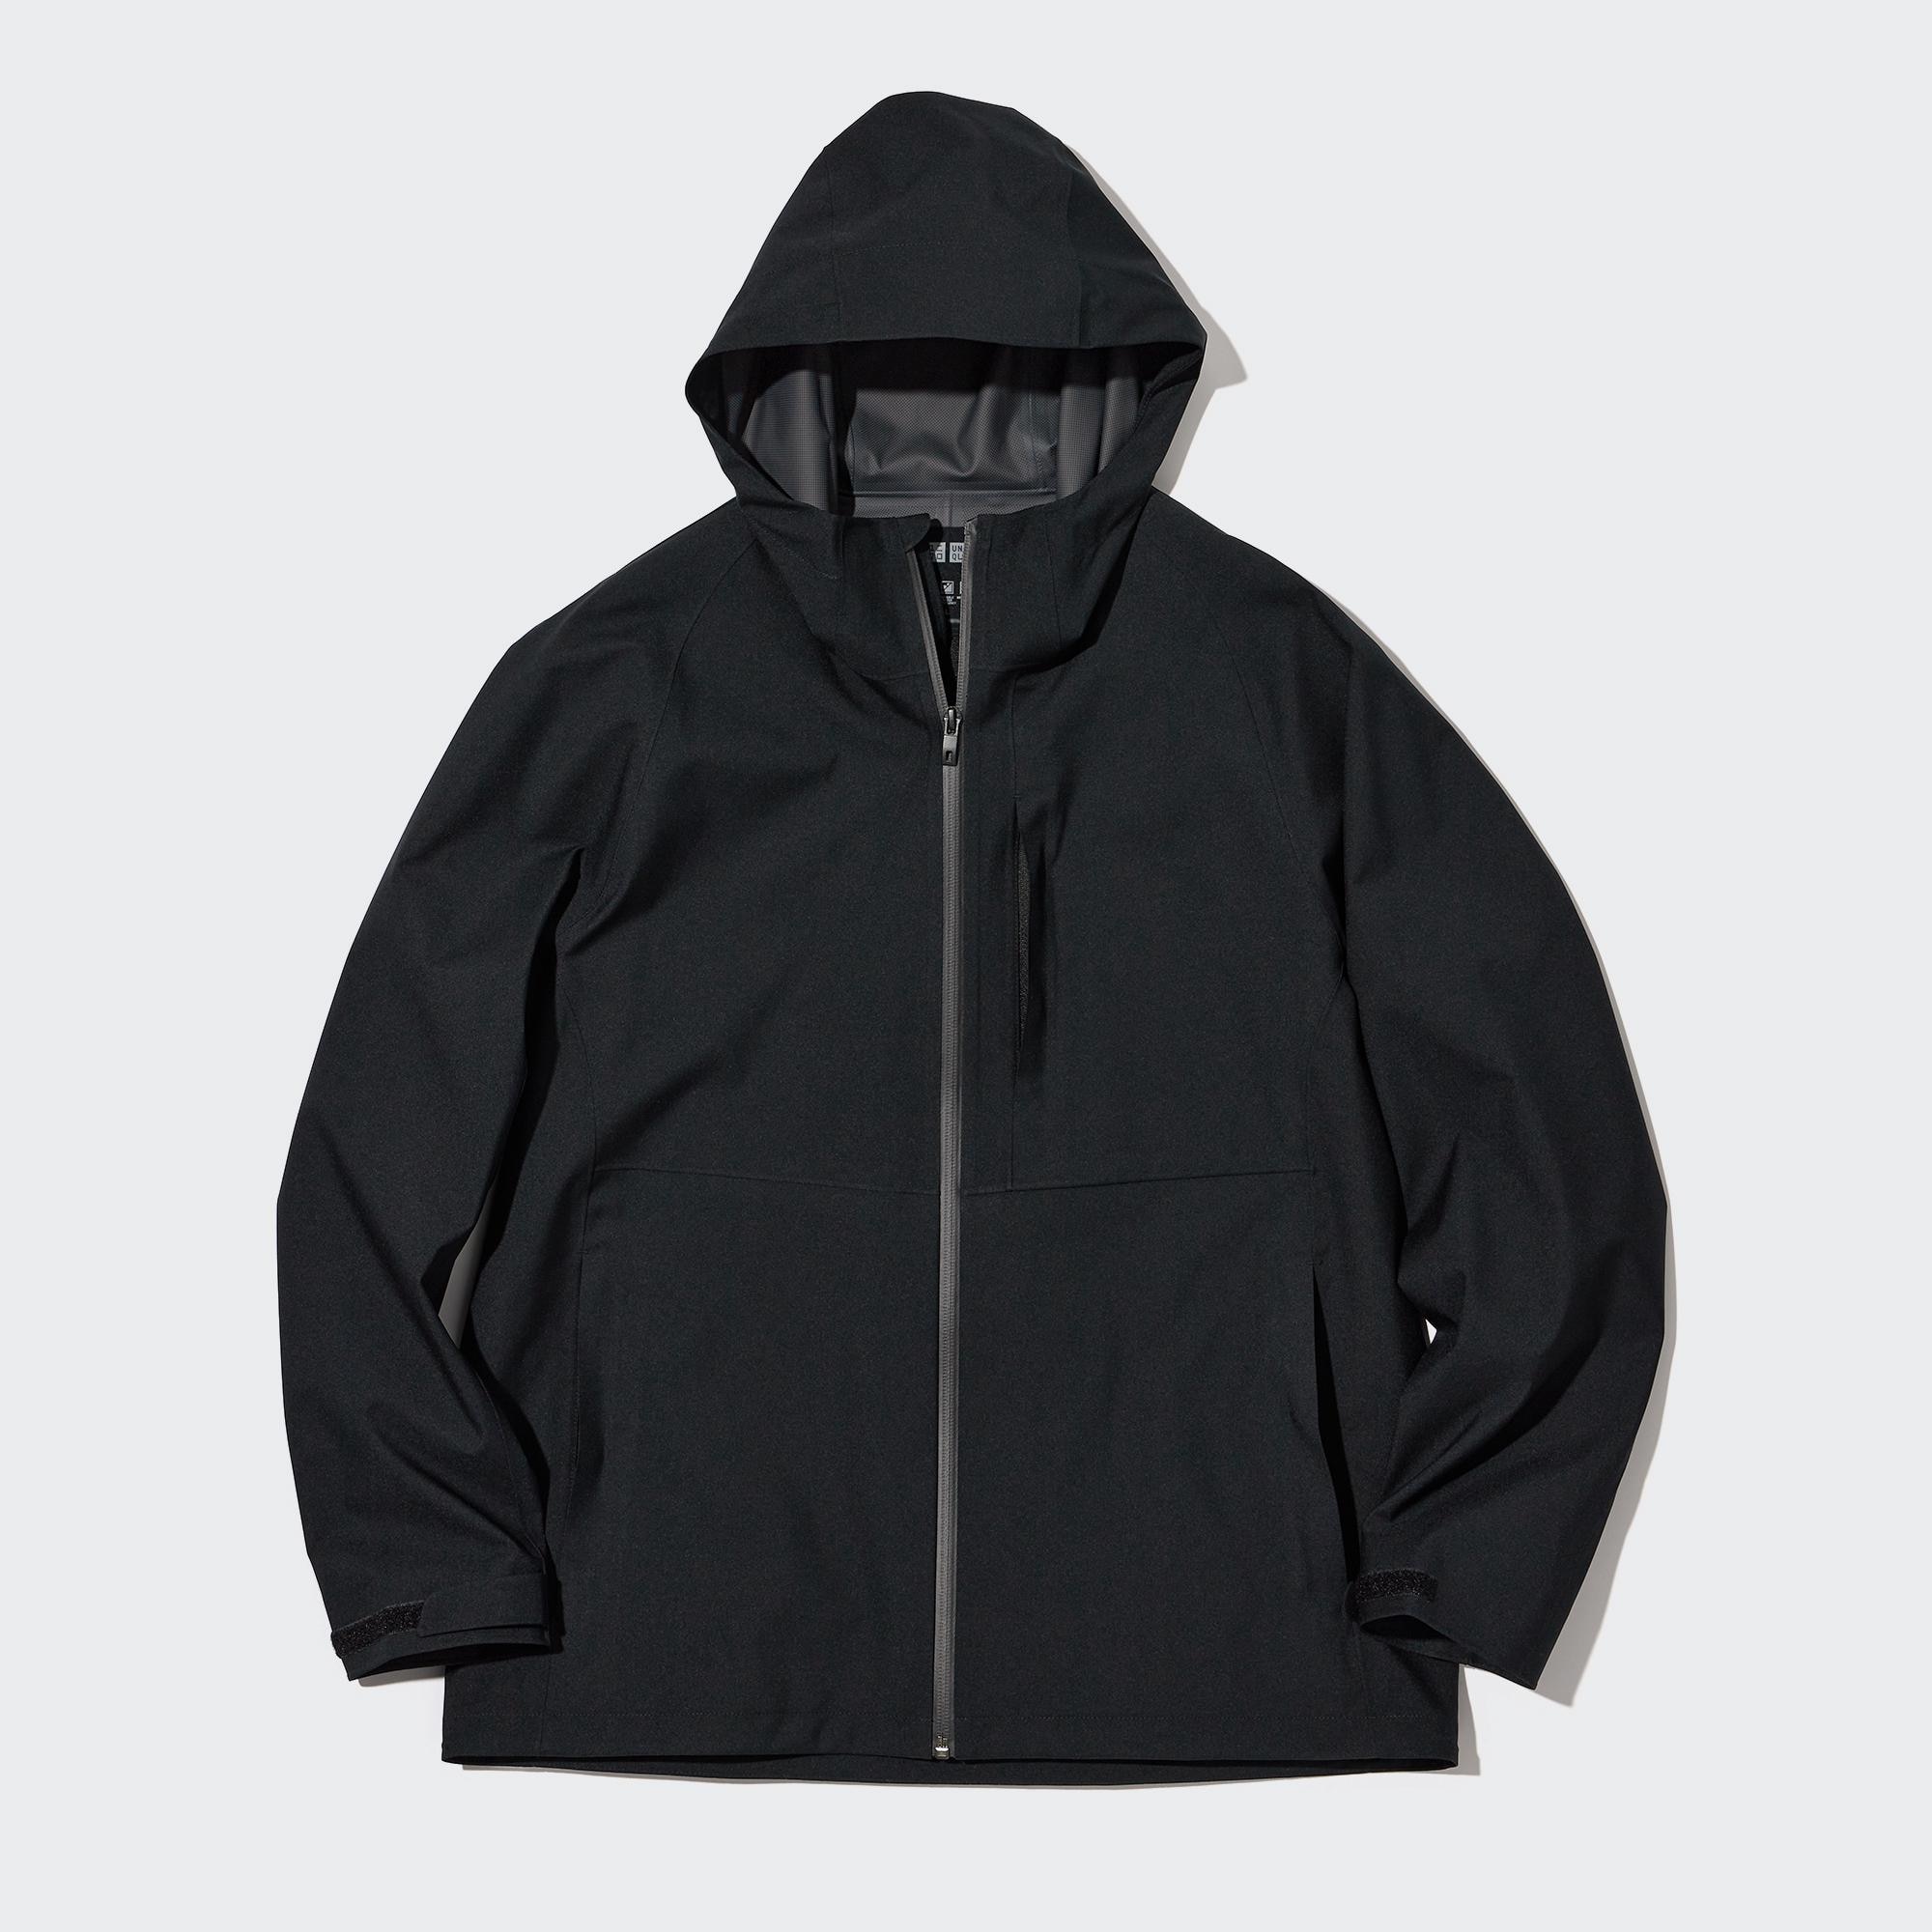 Blocktech Parka how to wash it without damaging it  runiqlo